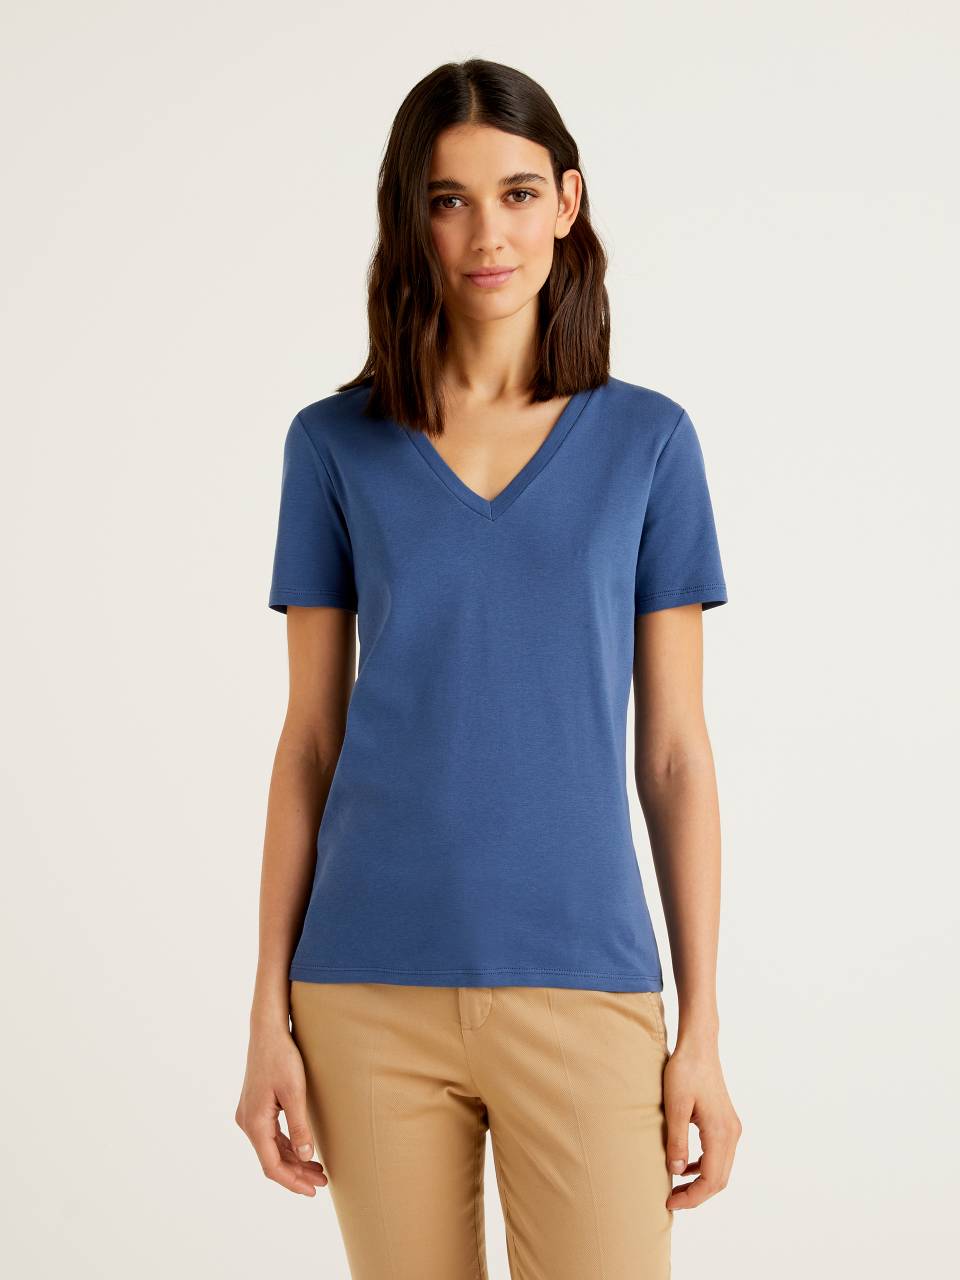 Benetton Pure cotton t-shirt with V-neck. 1